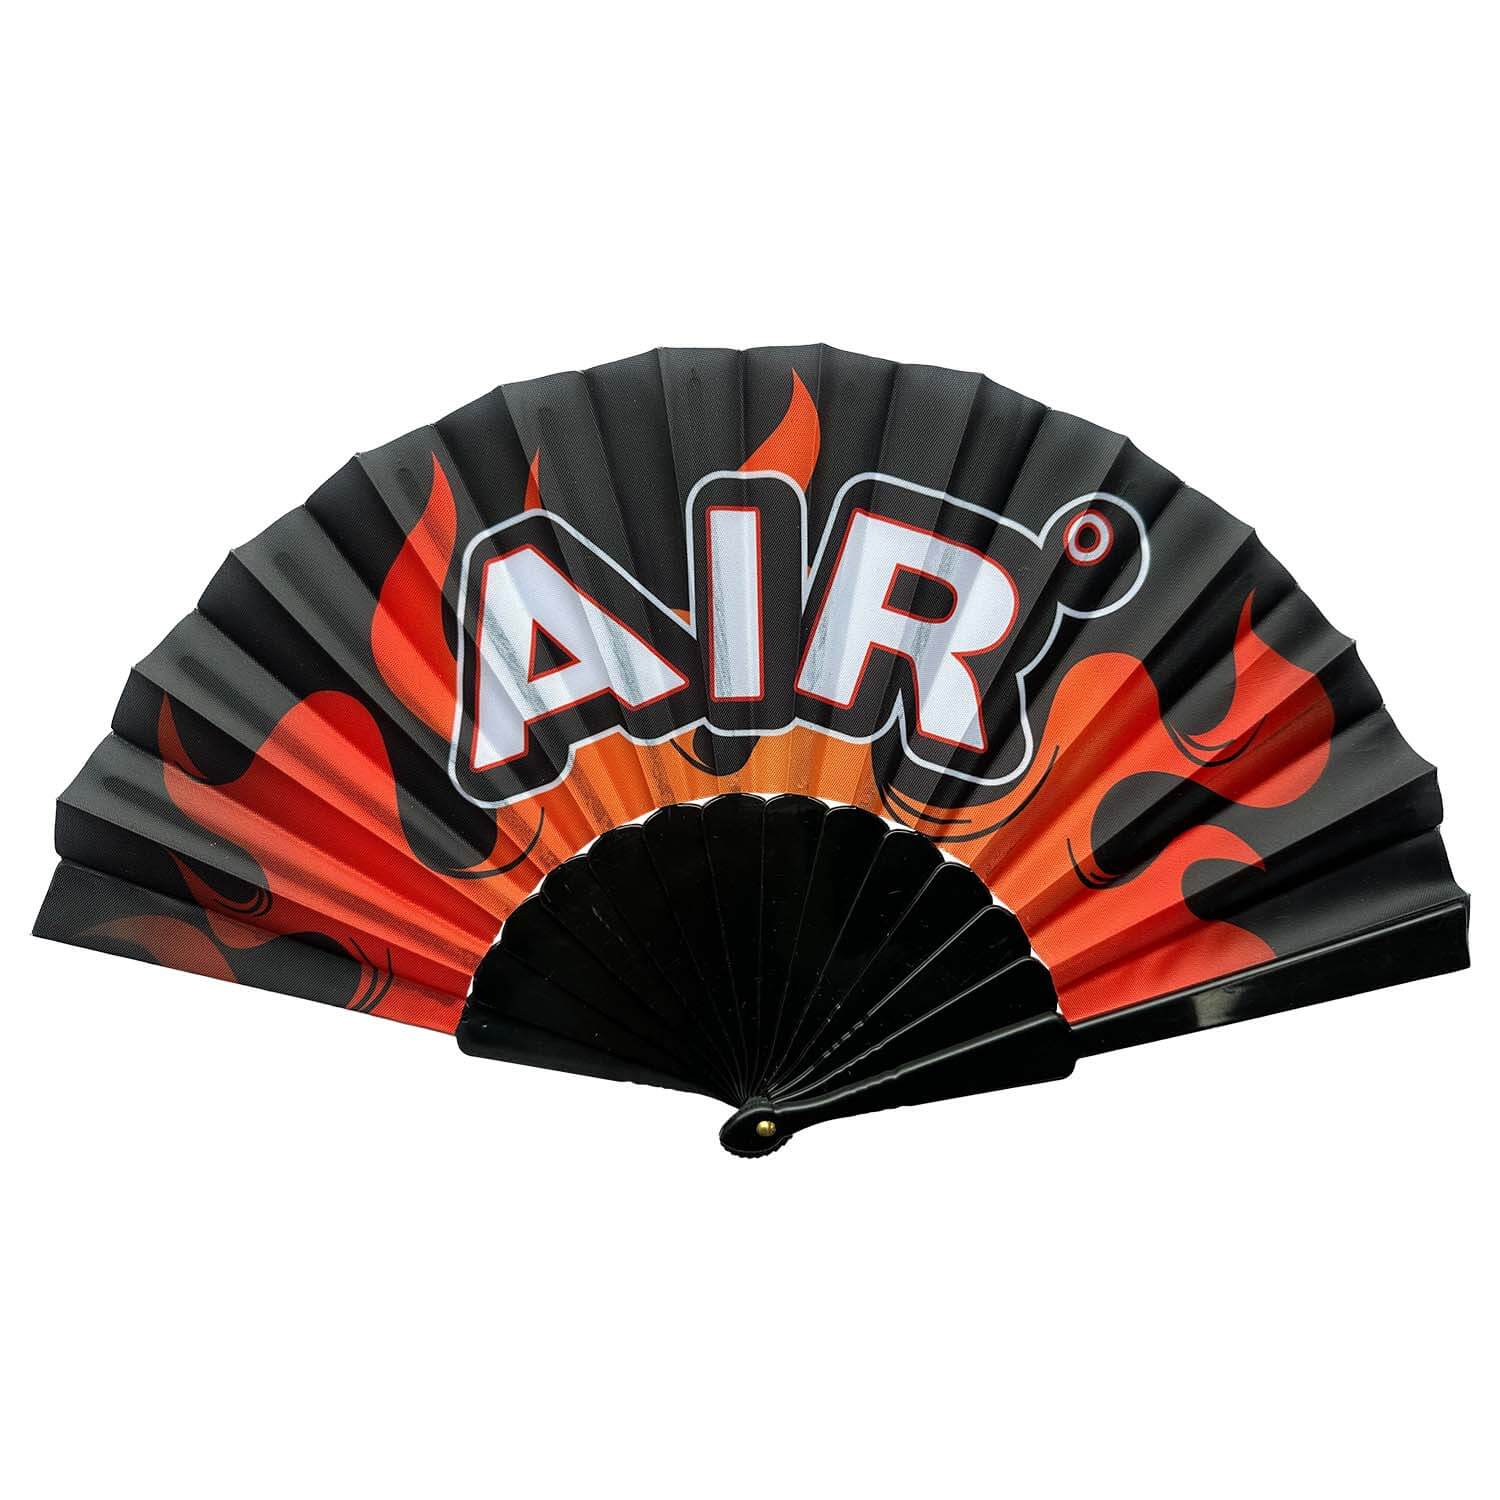 Custom Fans for Event Wholesale from $1.99